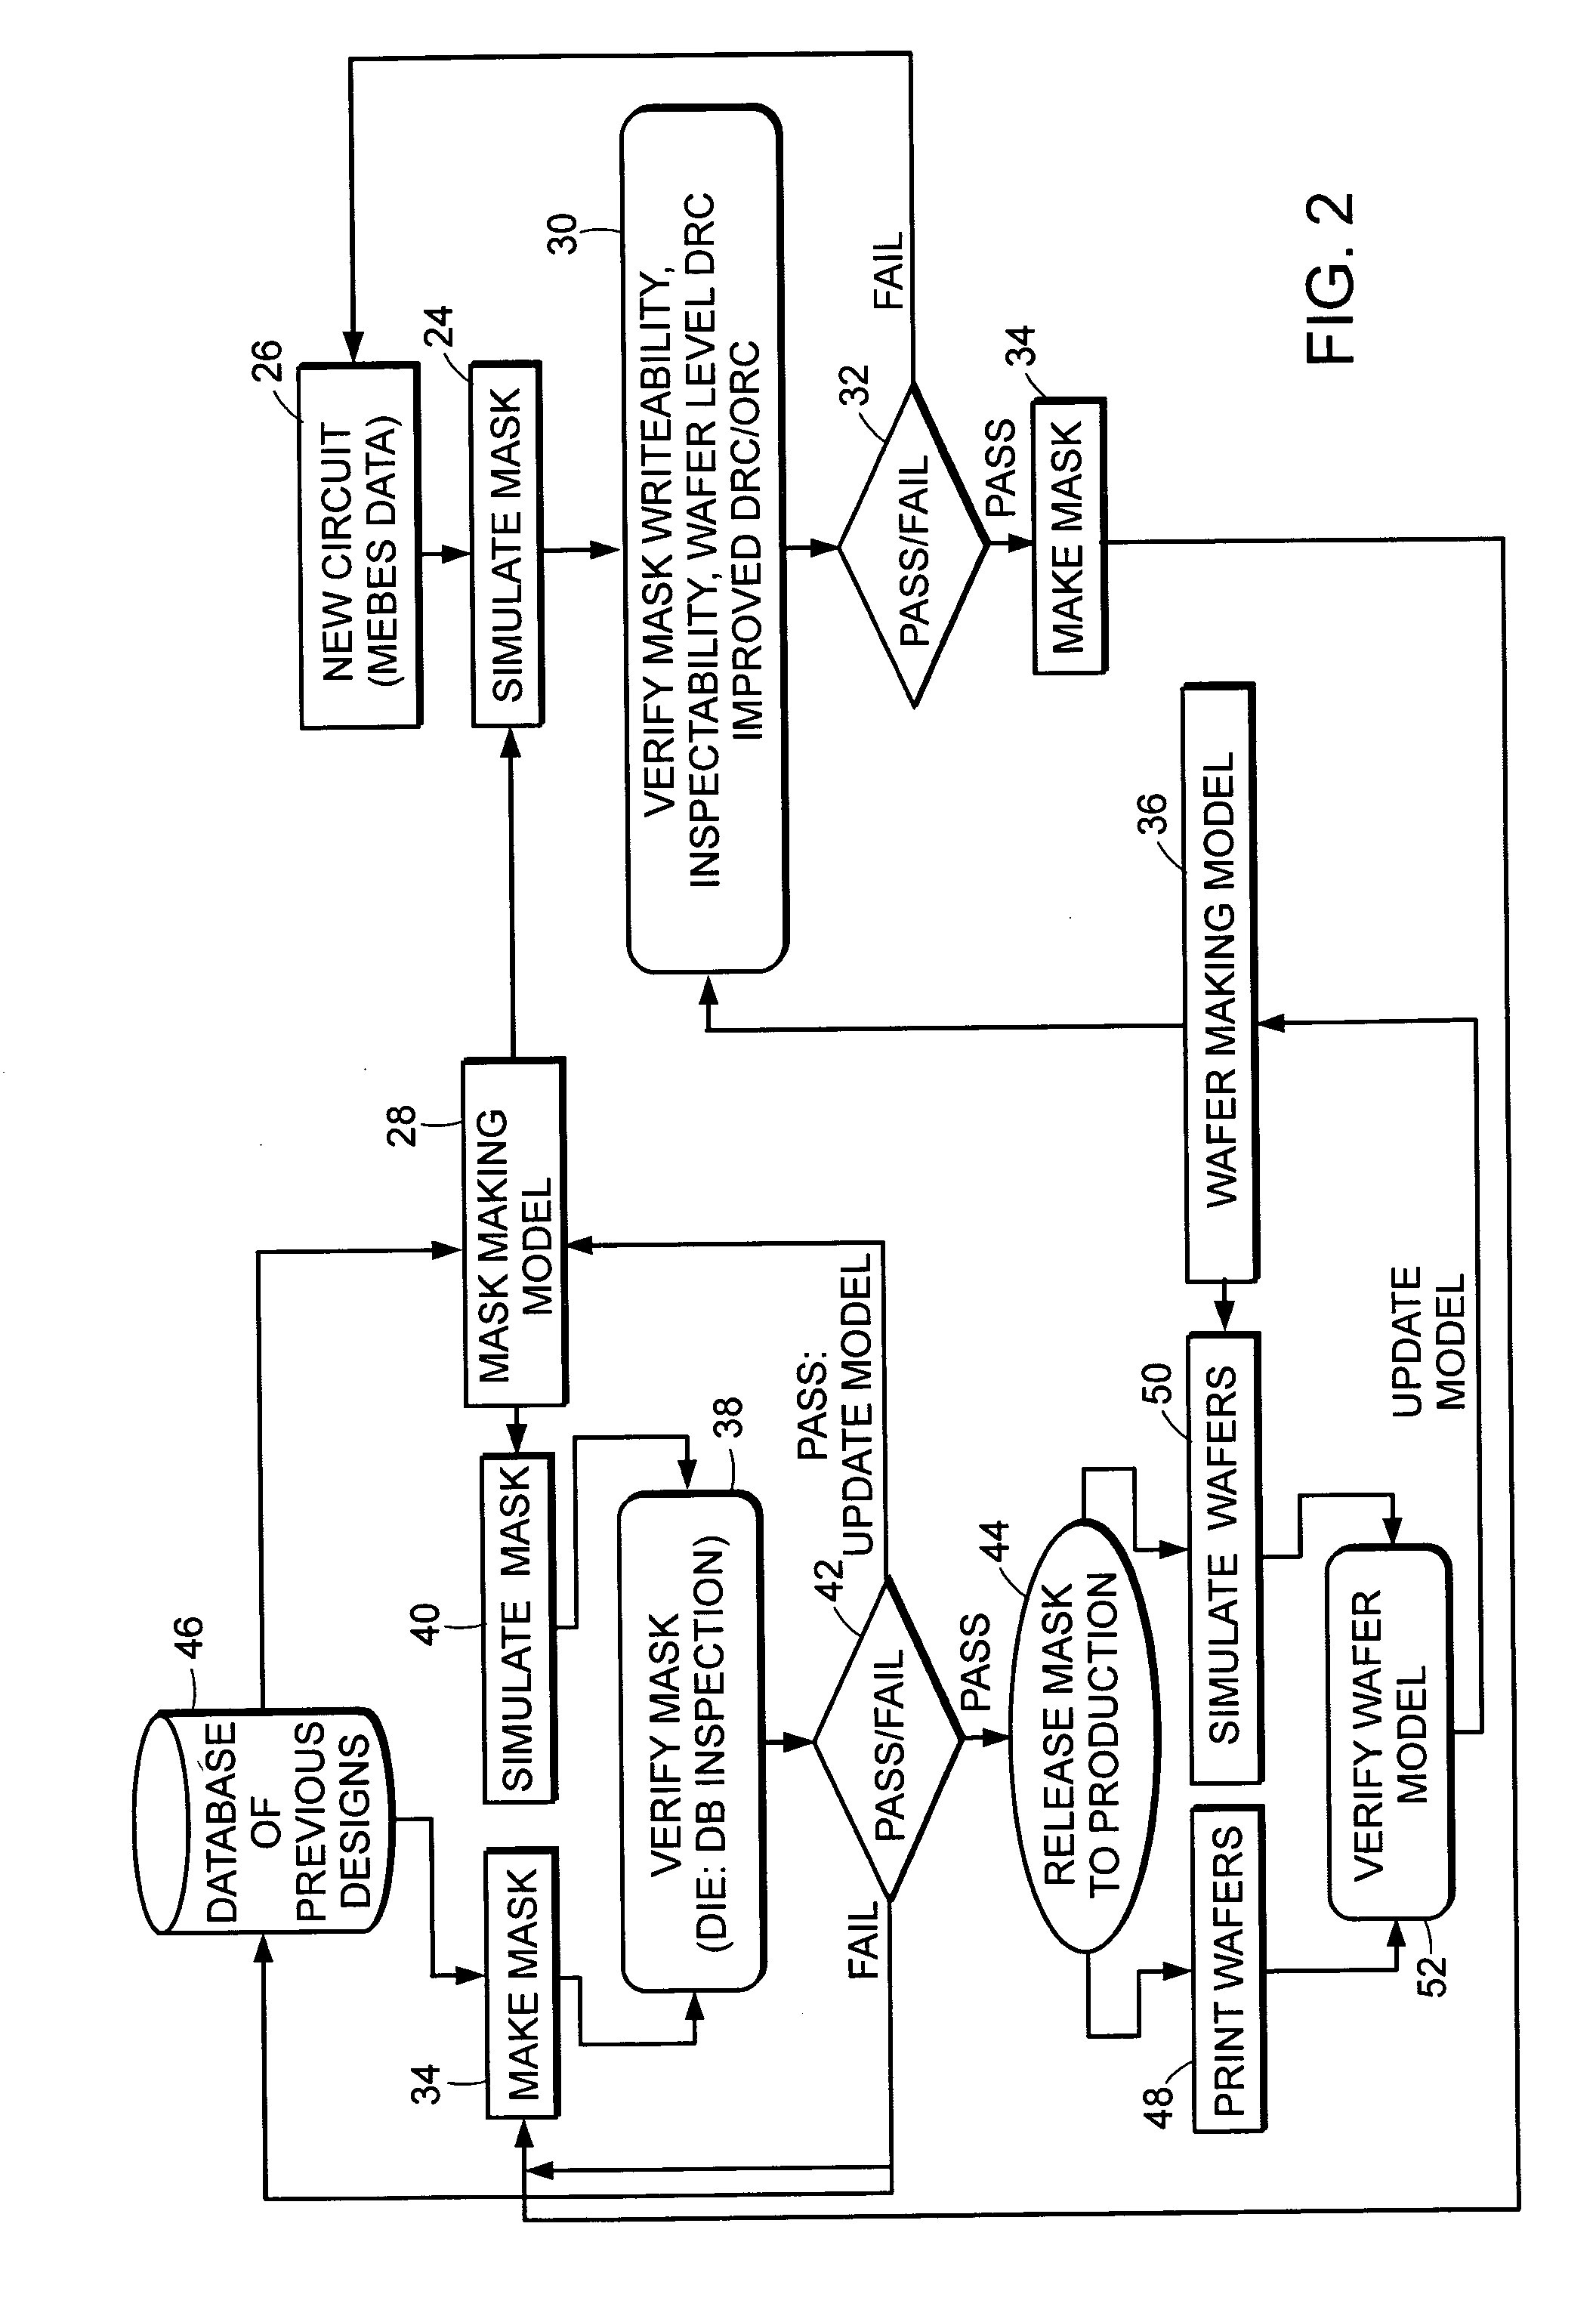 Methods, systems, and carrier media for evaluating reticle layout data